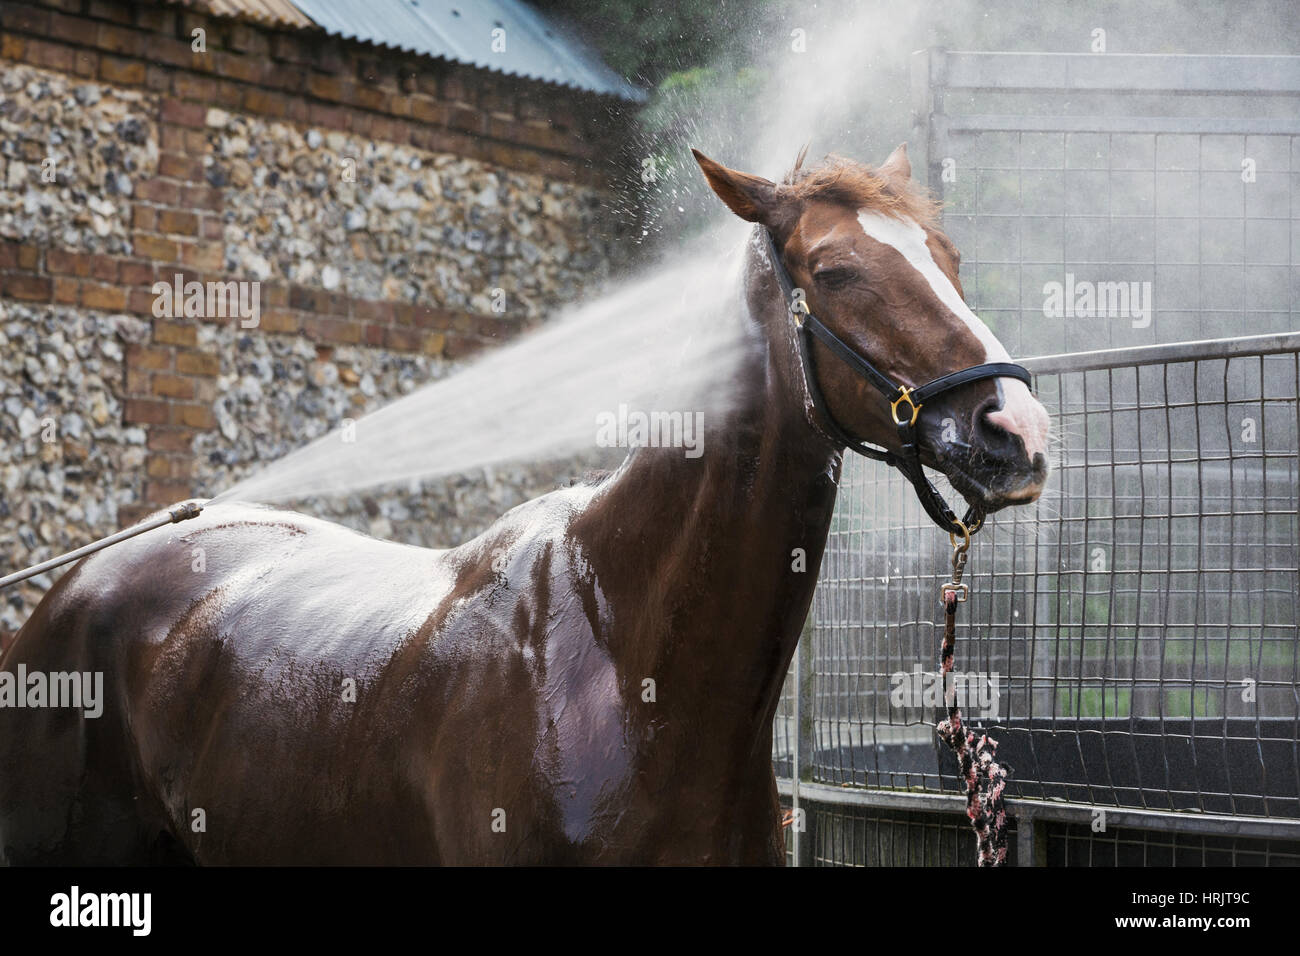 A thoroughbred horse being hosed down in a stable yard after exercise. Stock Photo